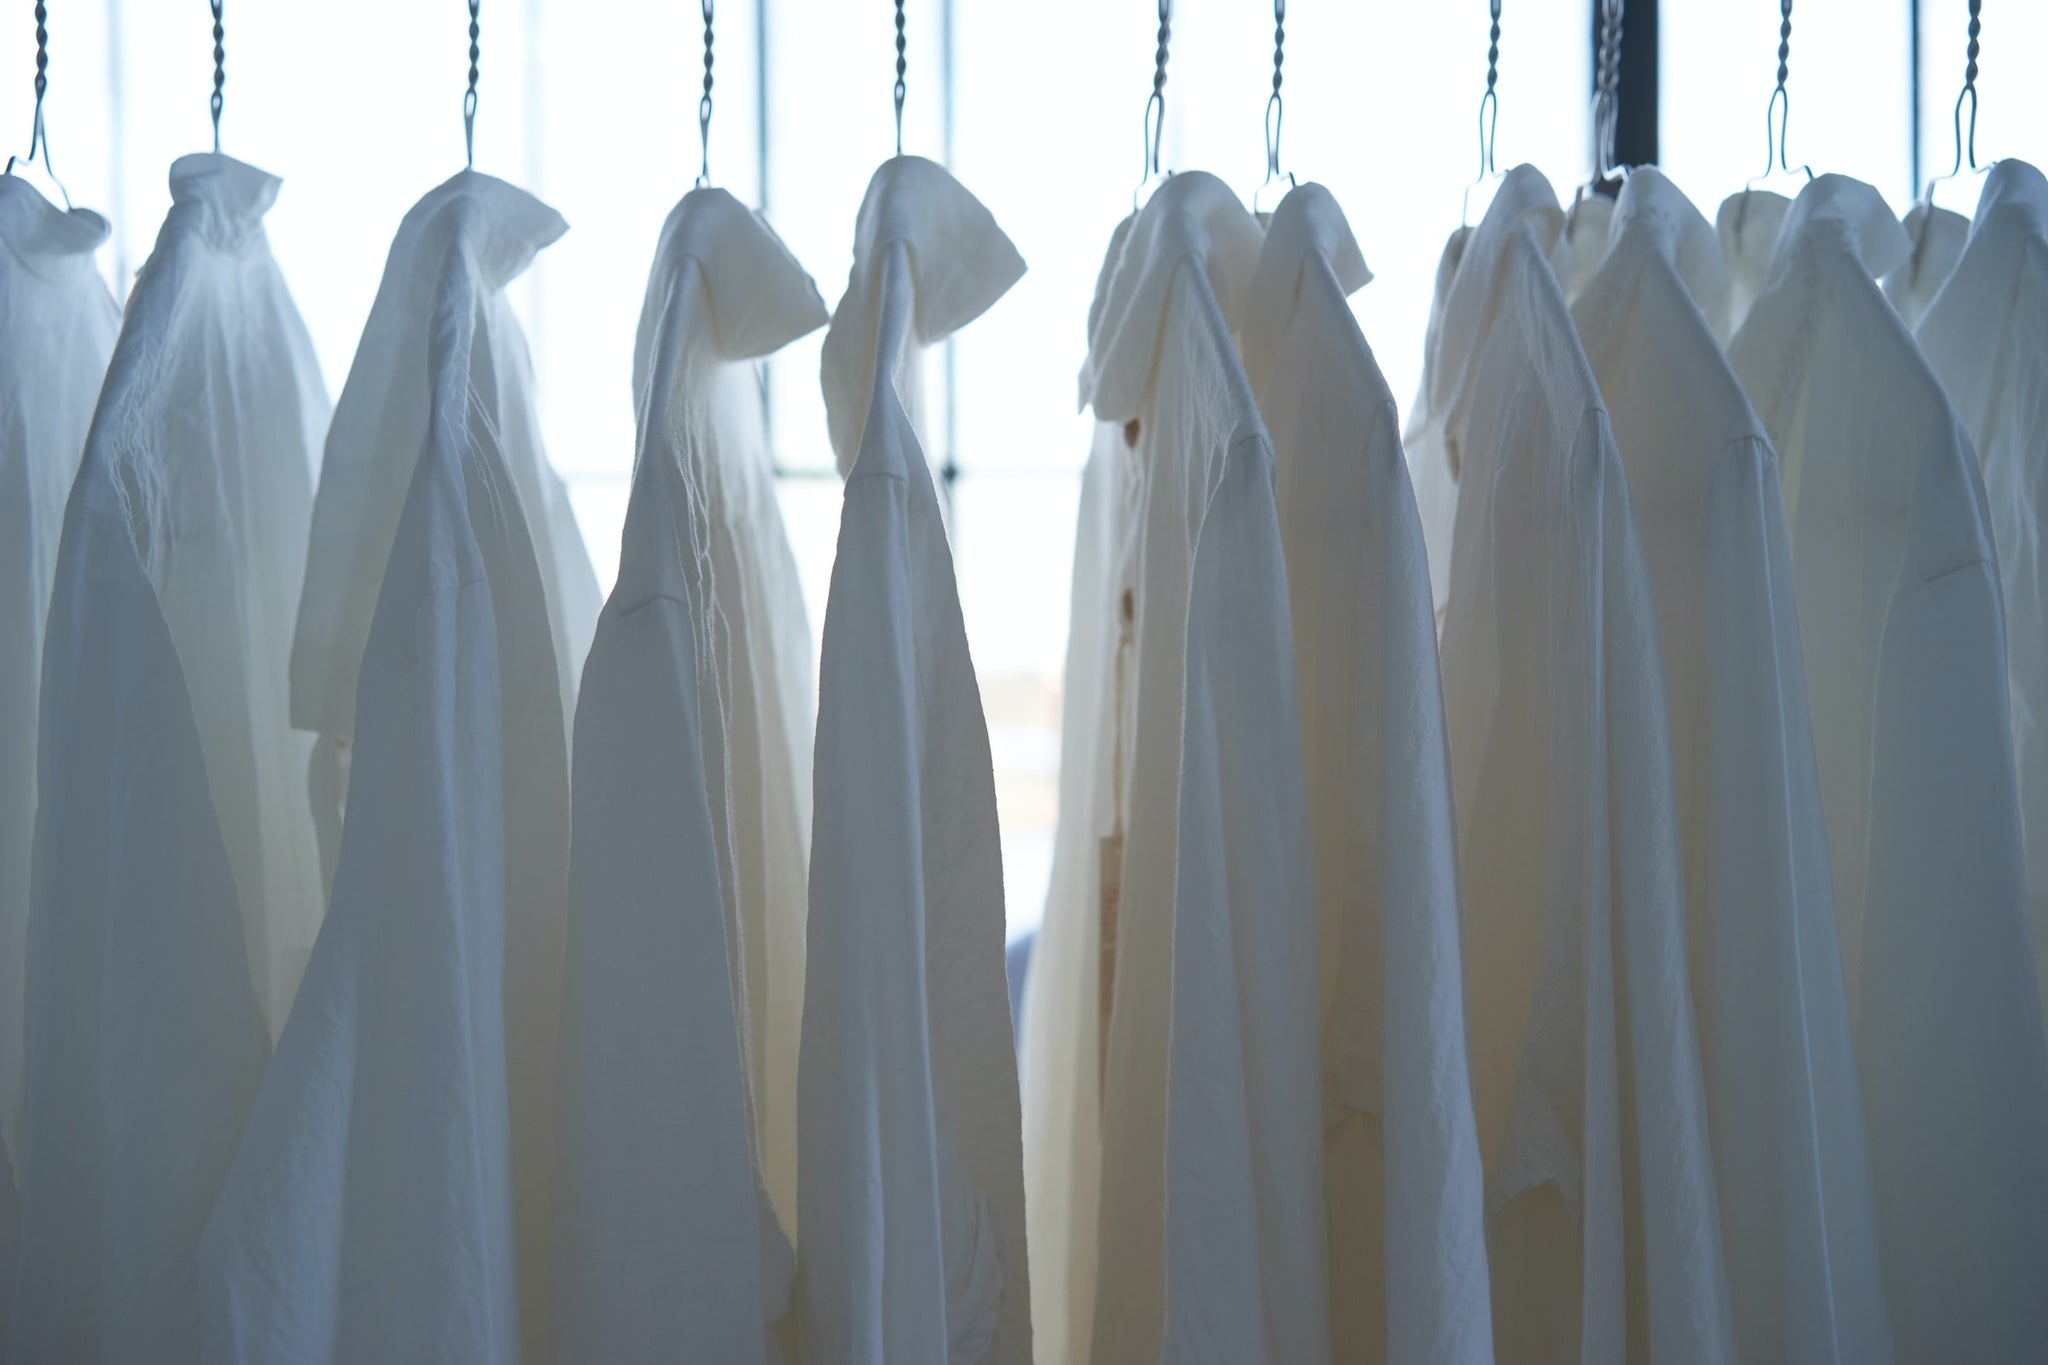 Photo of a rail of white shirts hanging up